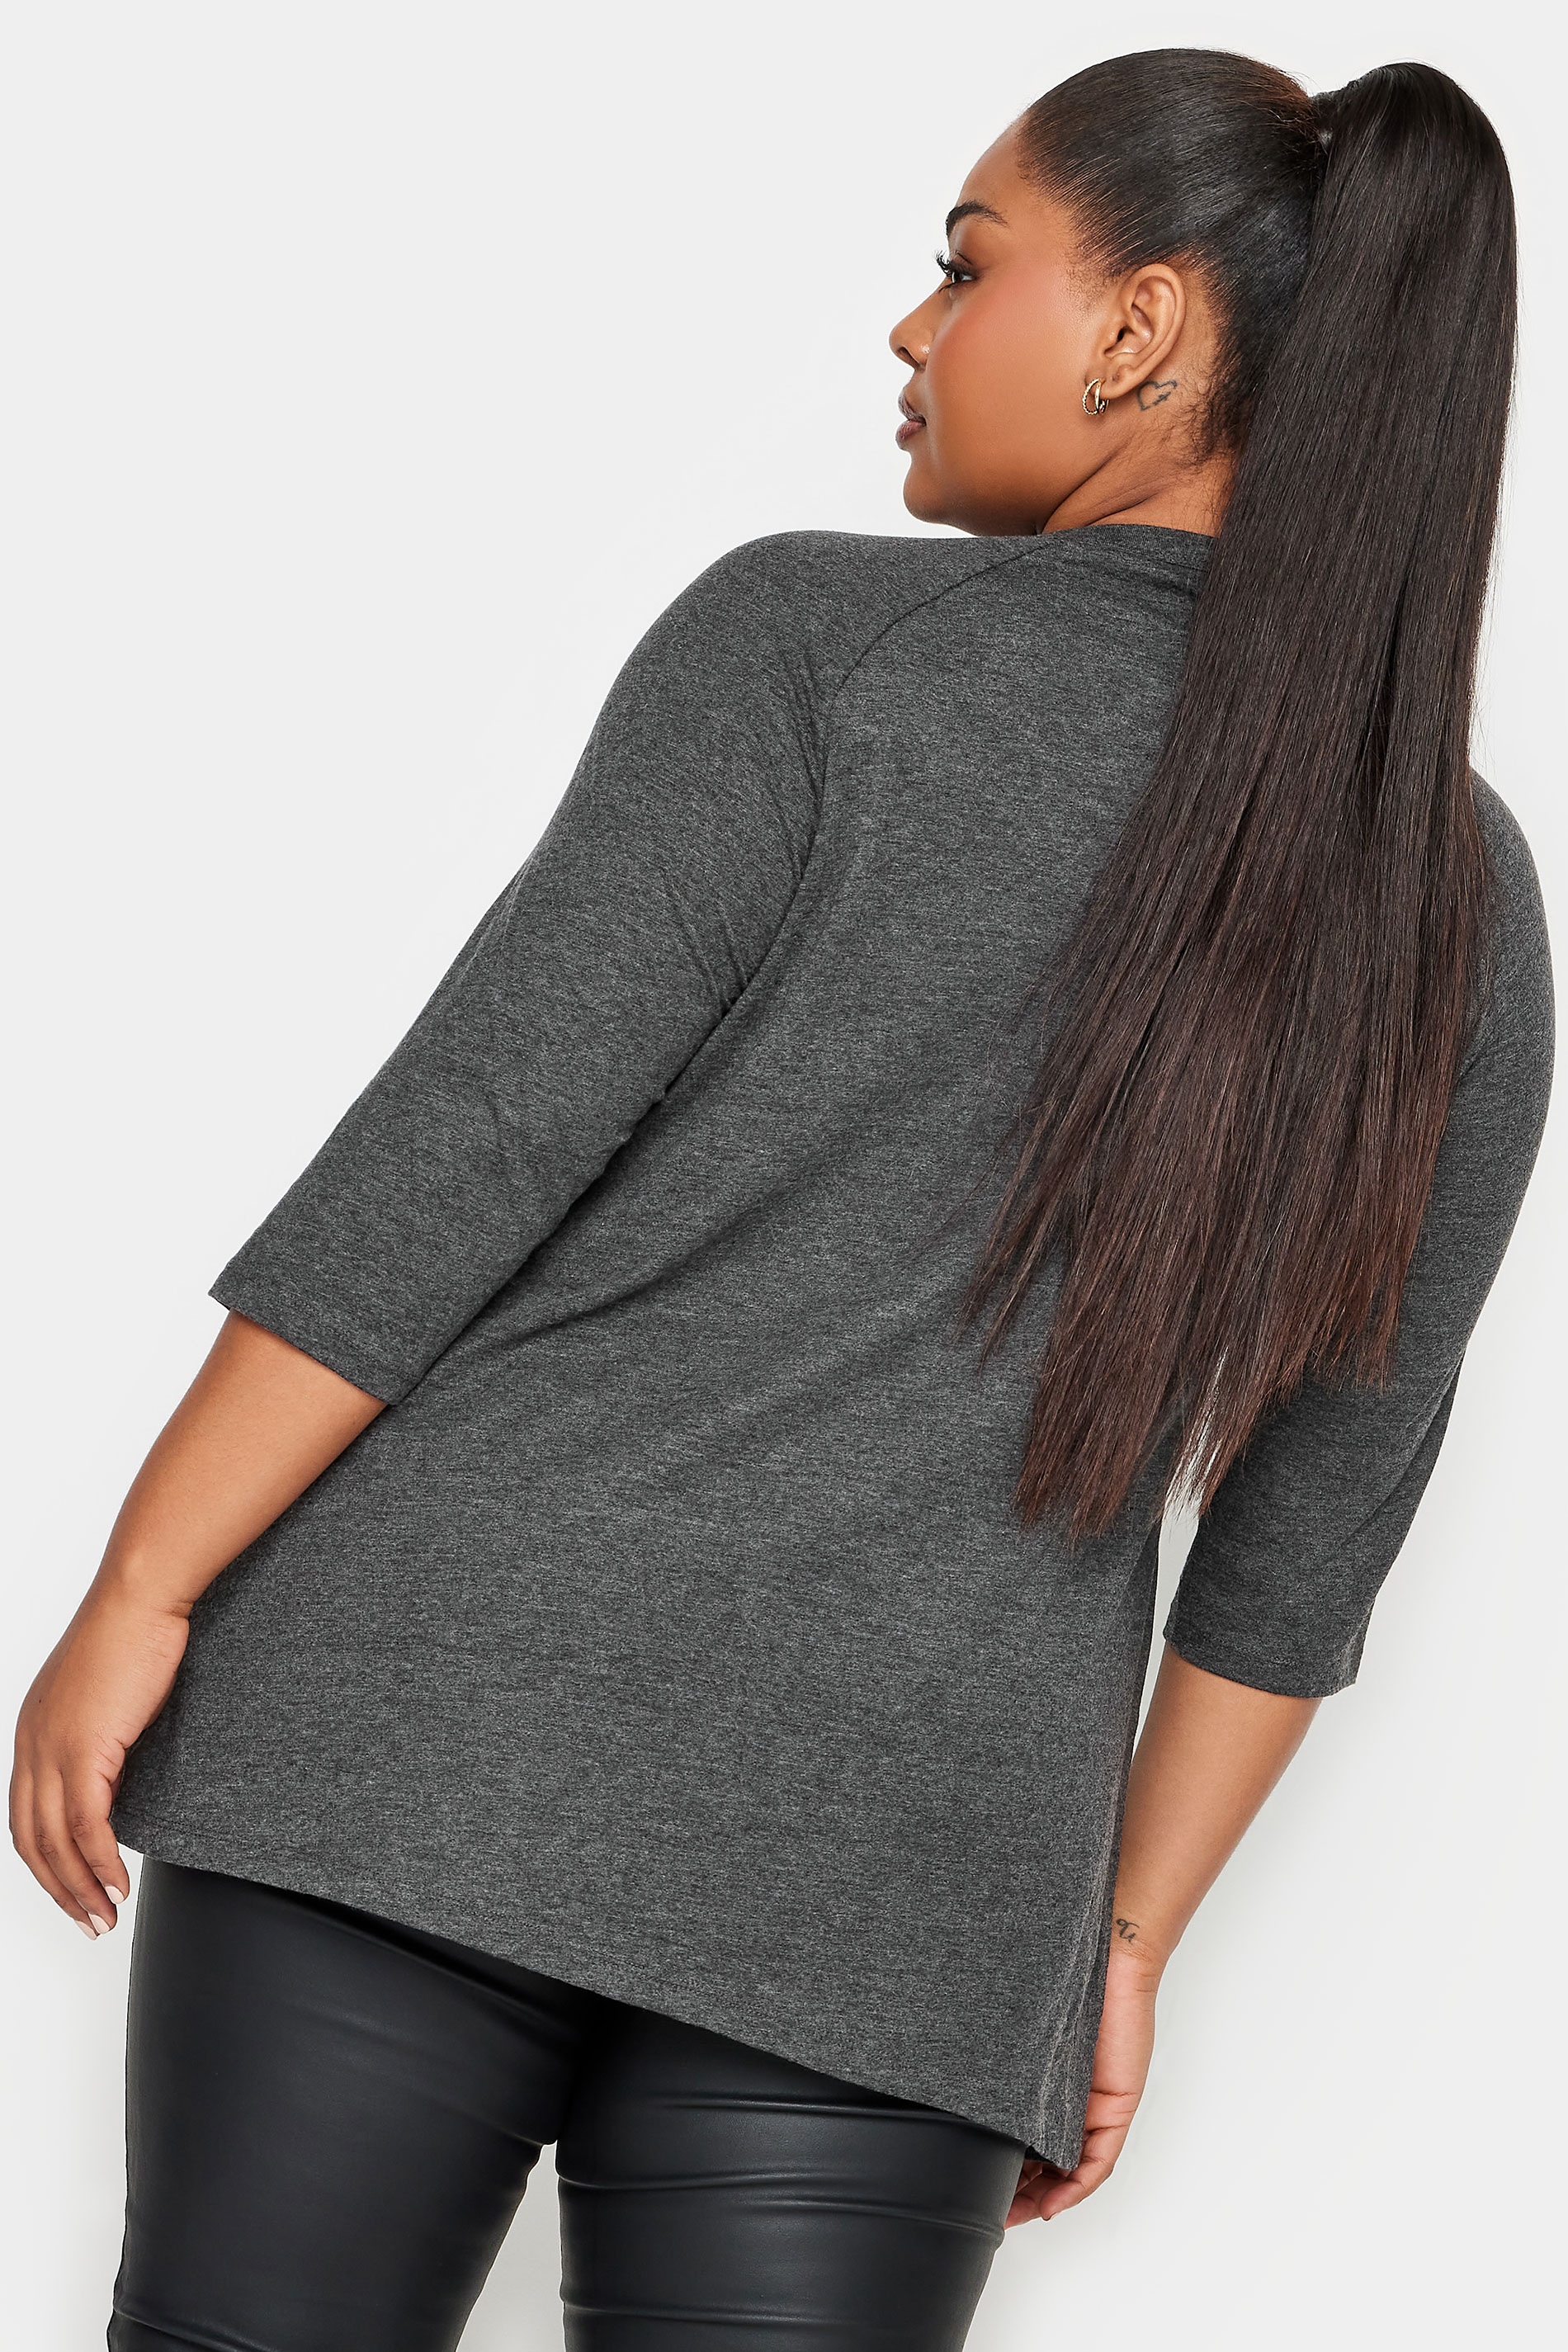 YOURS Plus Size Grey Lace Up Eyelet Top | Yours Clothing 3